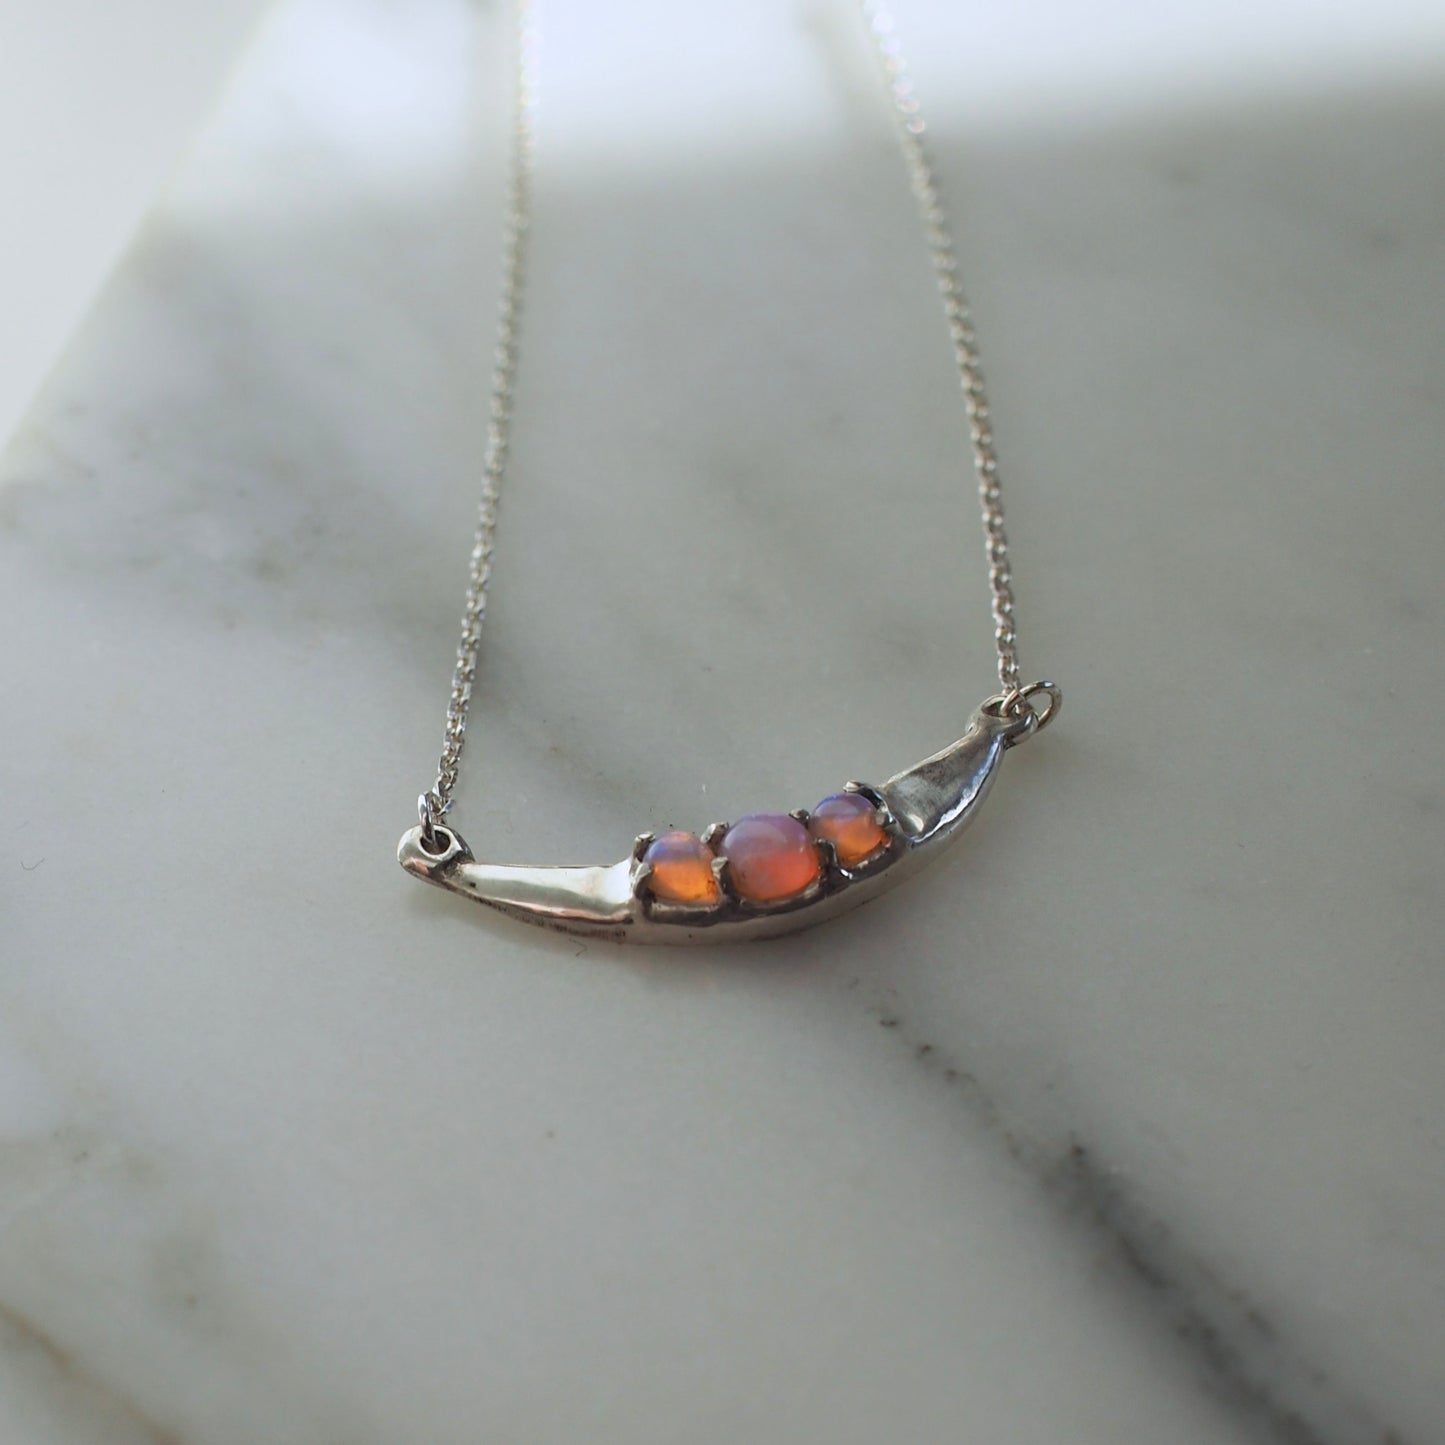 Fantasy Opal Crescent Necklace - One of a Kind